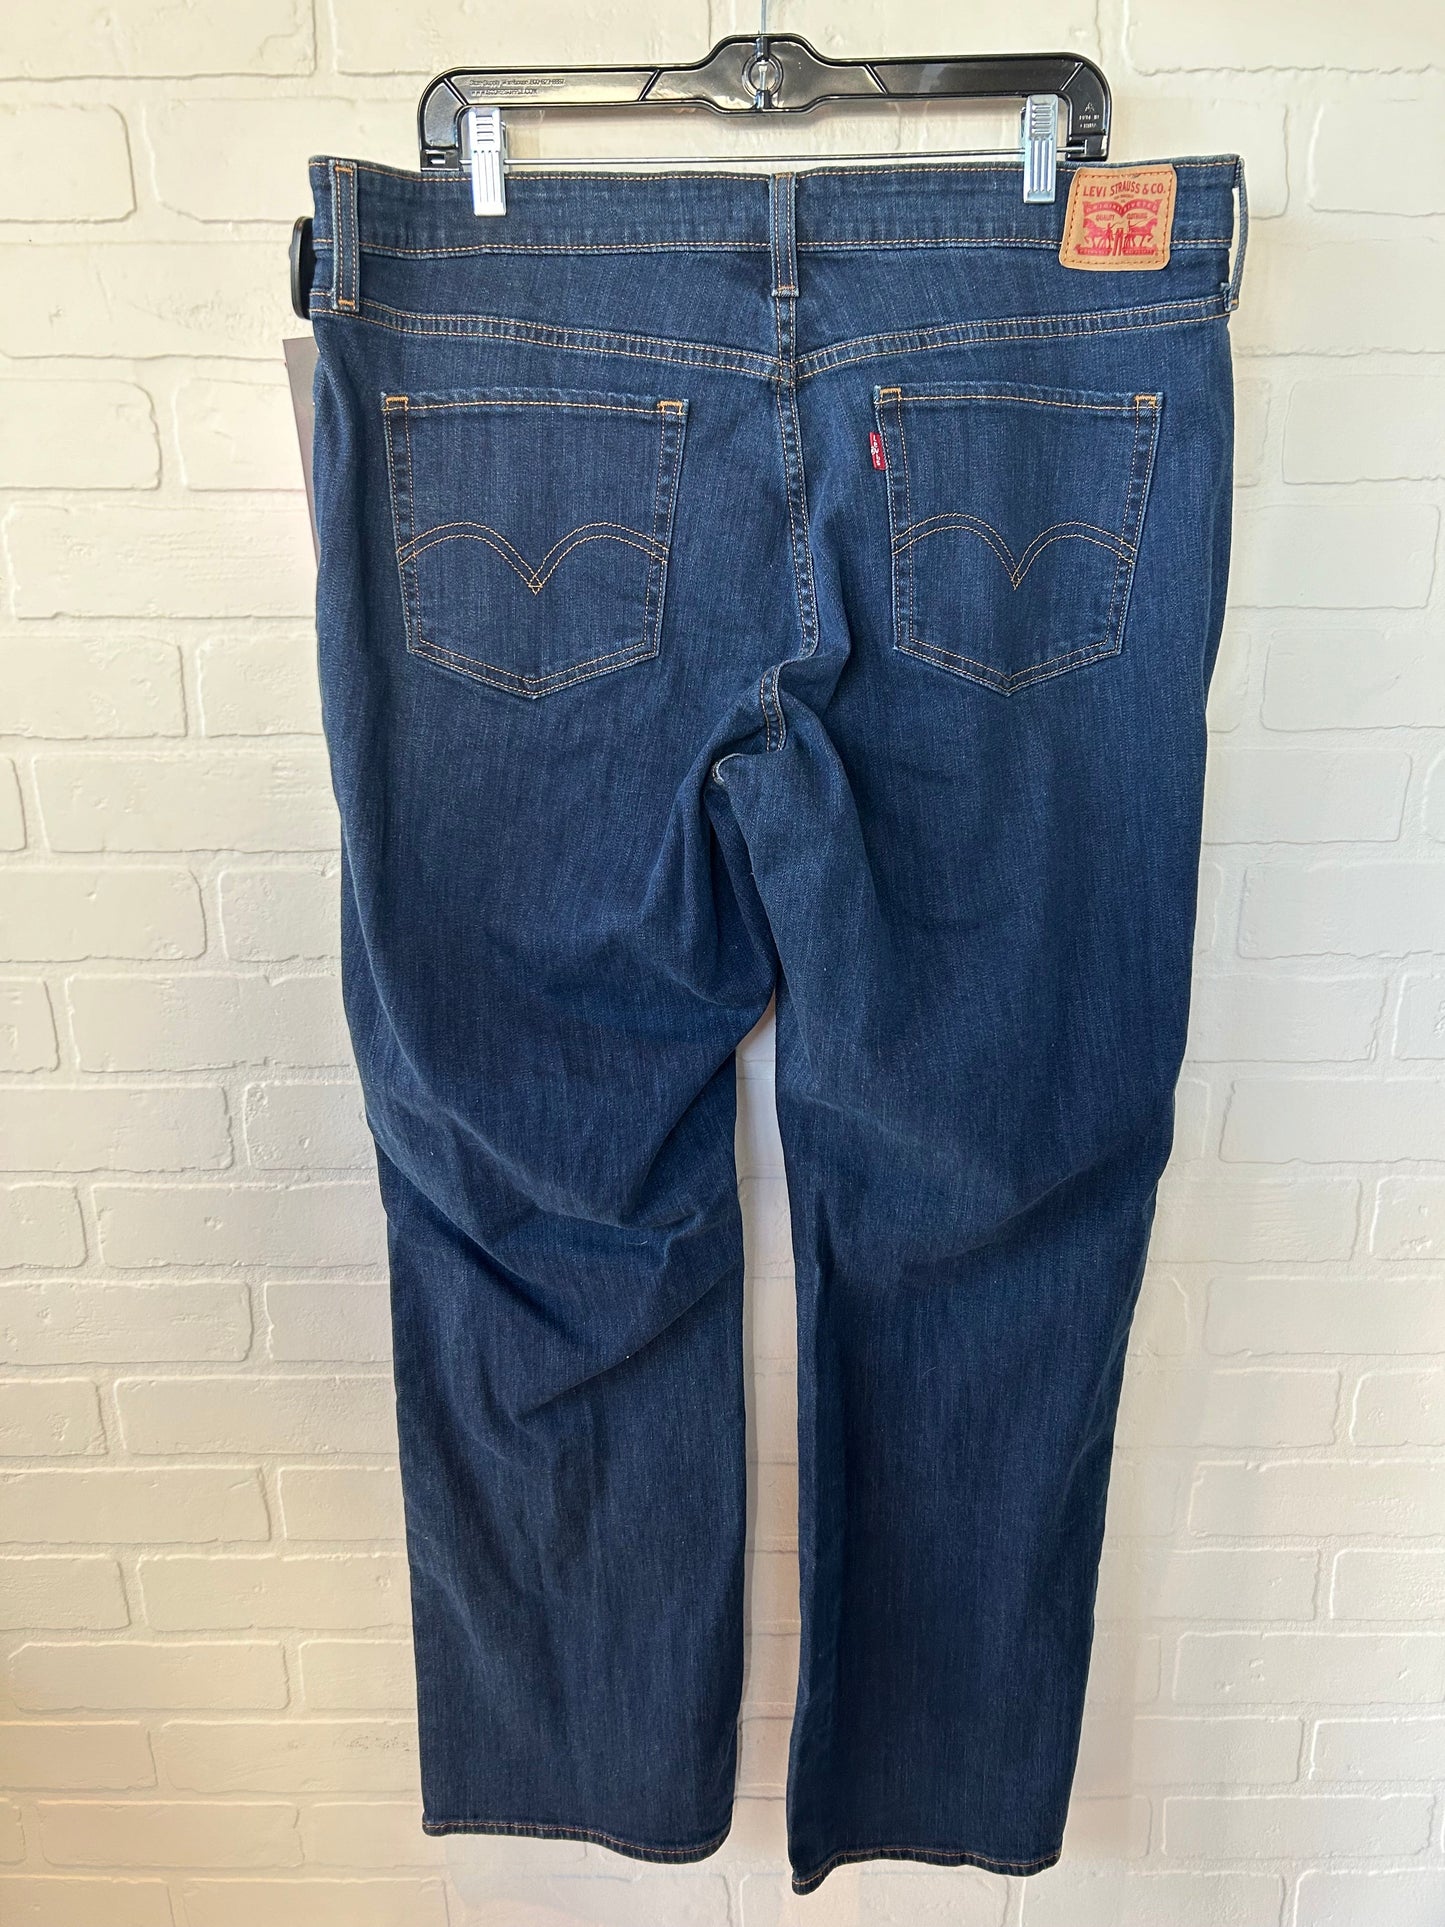 Jeans Boot Cut By Levis  Size: 18w